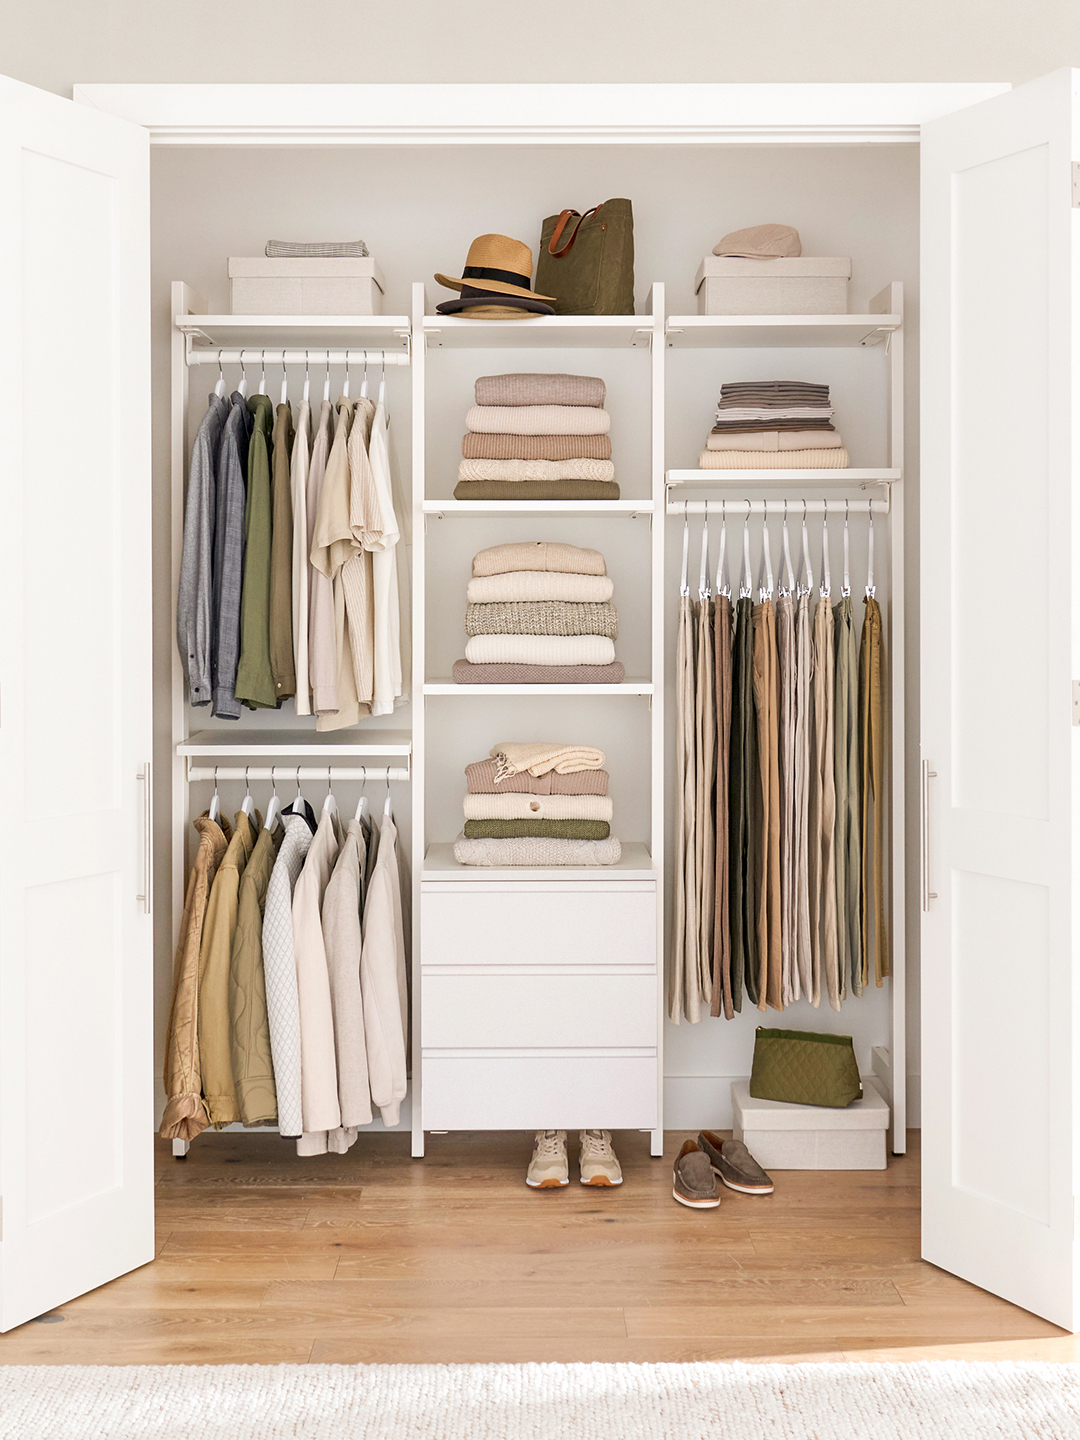 Genius Closet Organizing Tips to Maximize Every Single Inch of Space